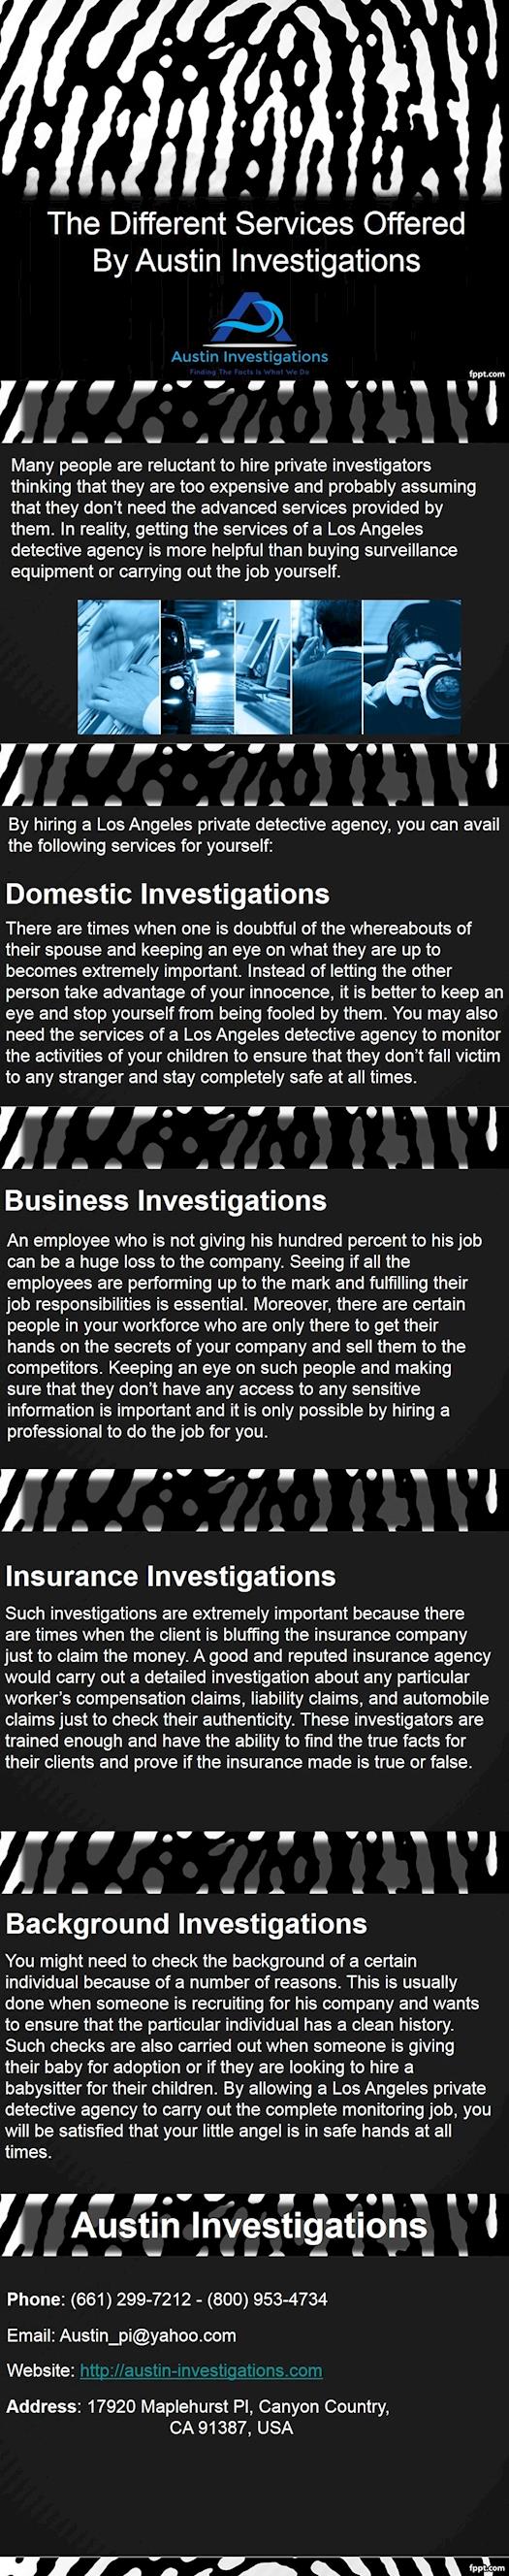 The Different Services Offered By Austin Investigations